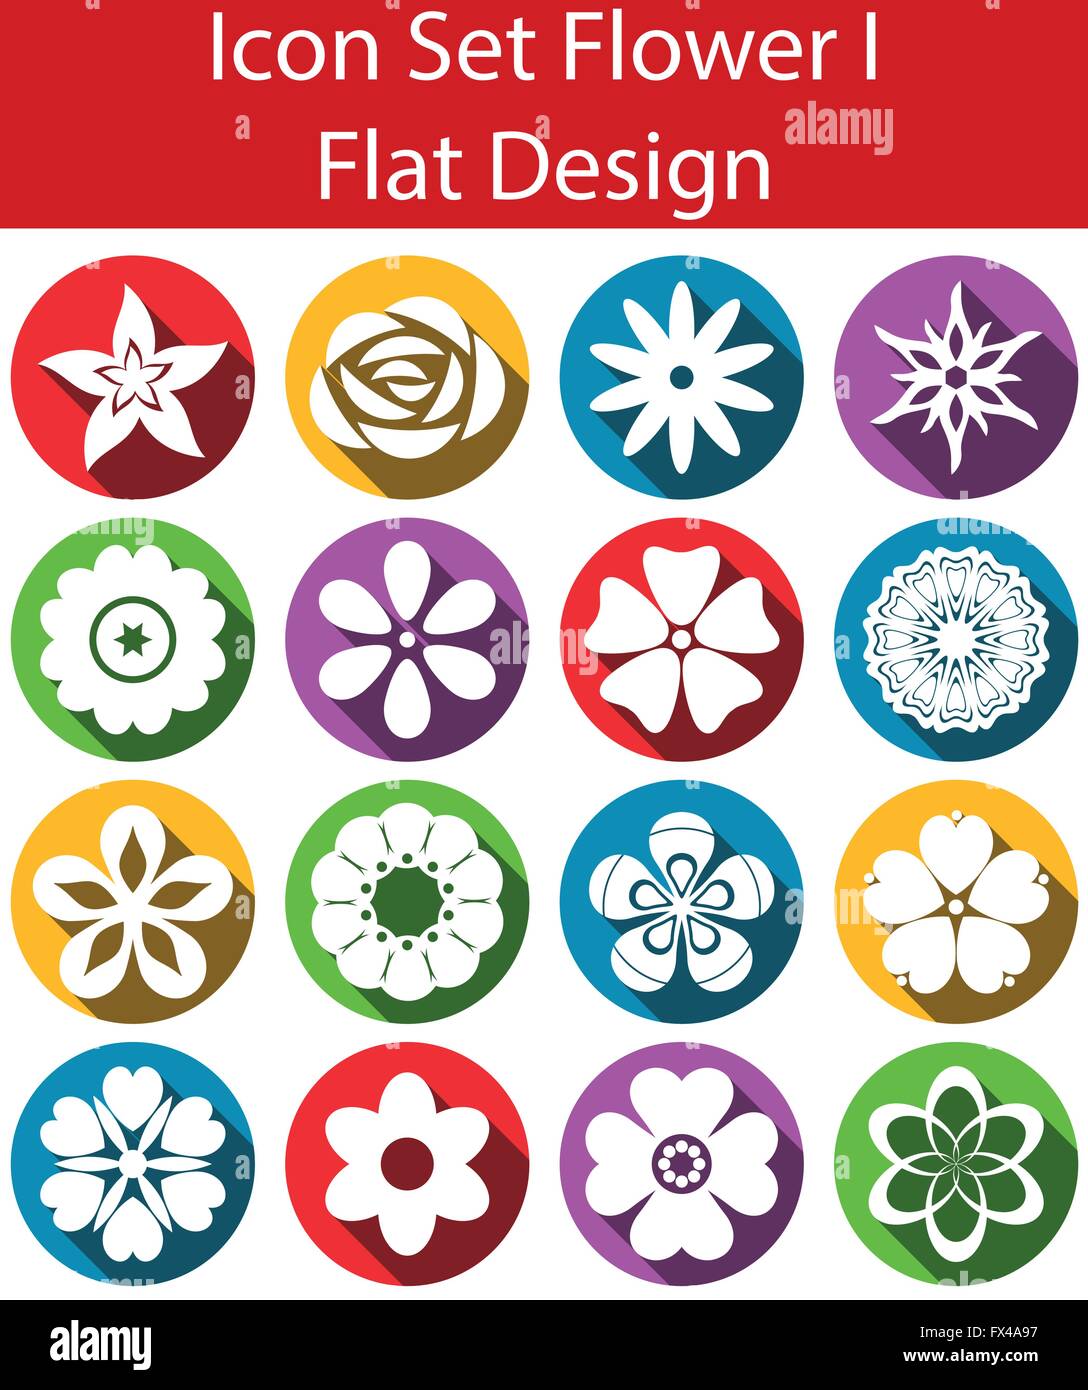 Flat Design Icon Set Flowers I with 16 icons for the creative use in web an graphic design Stock Vector